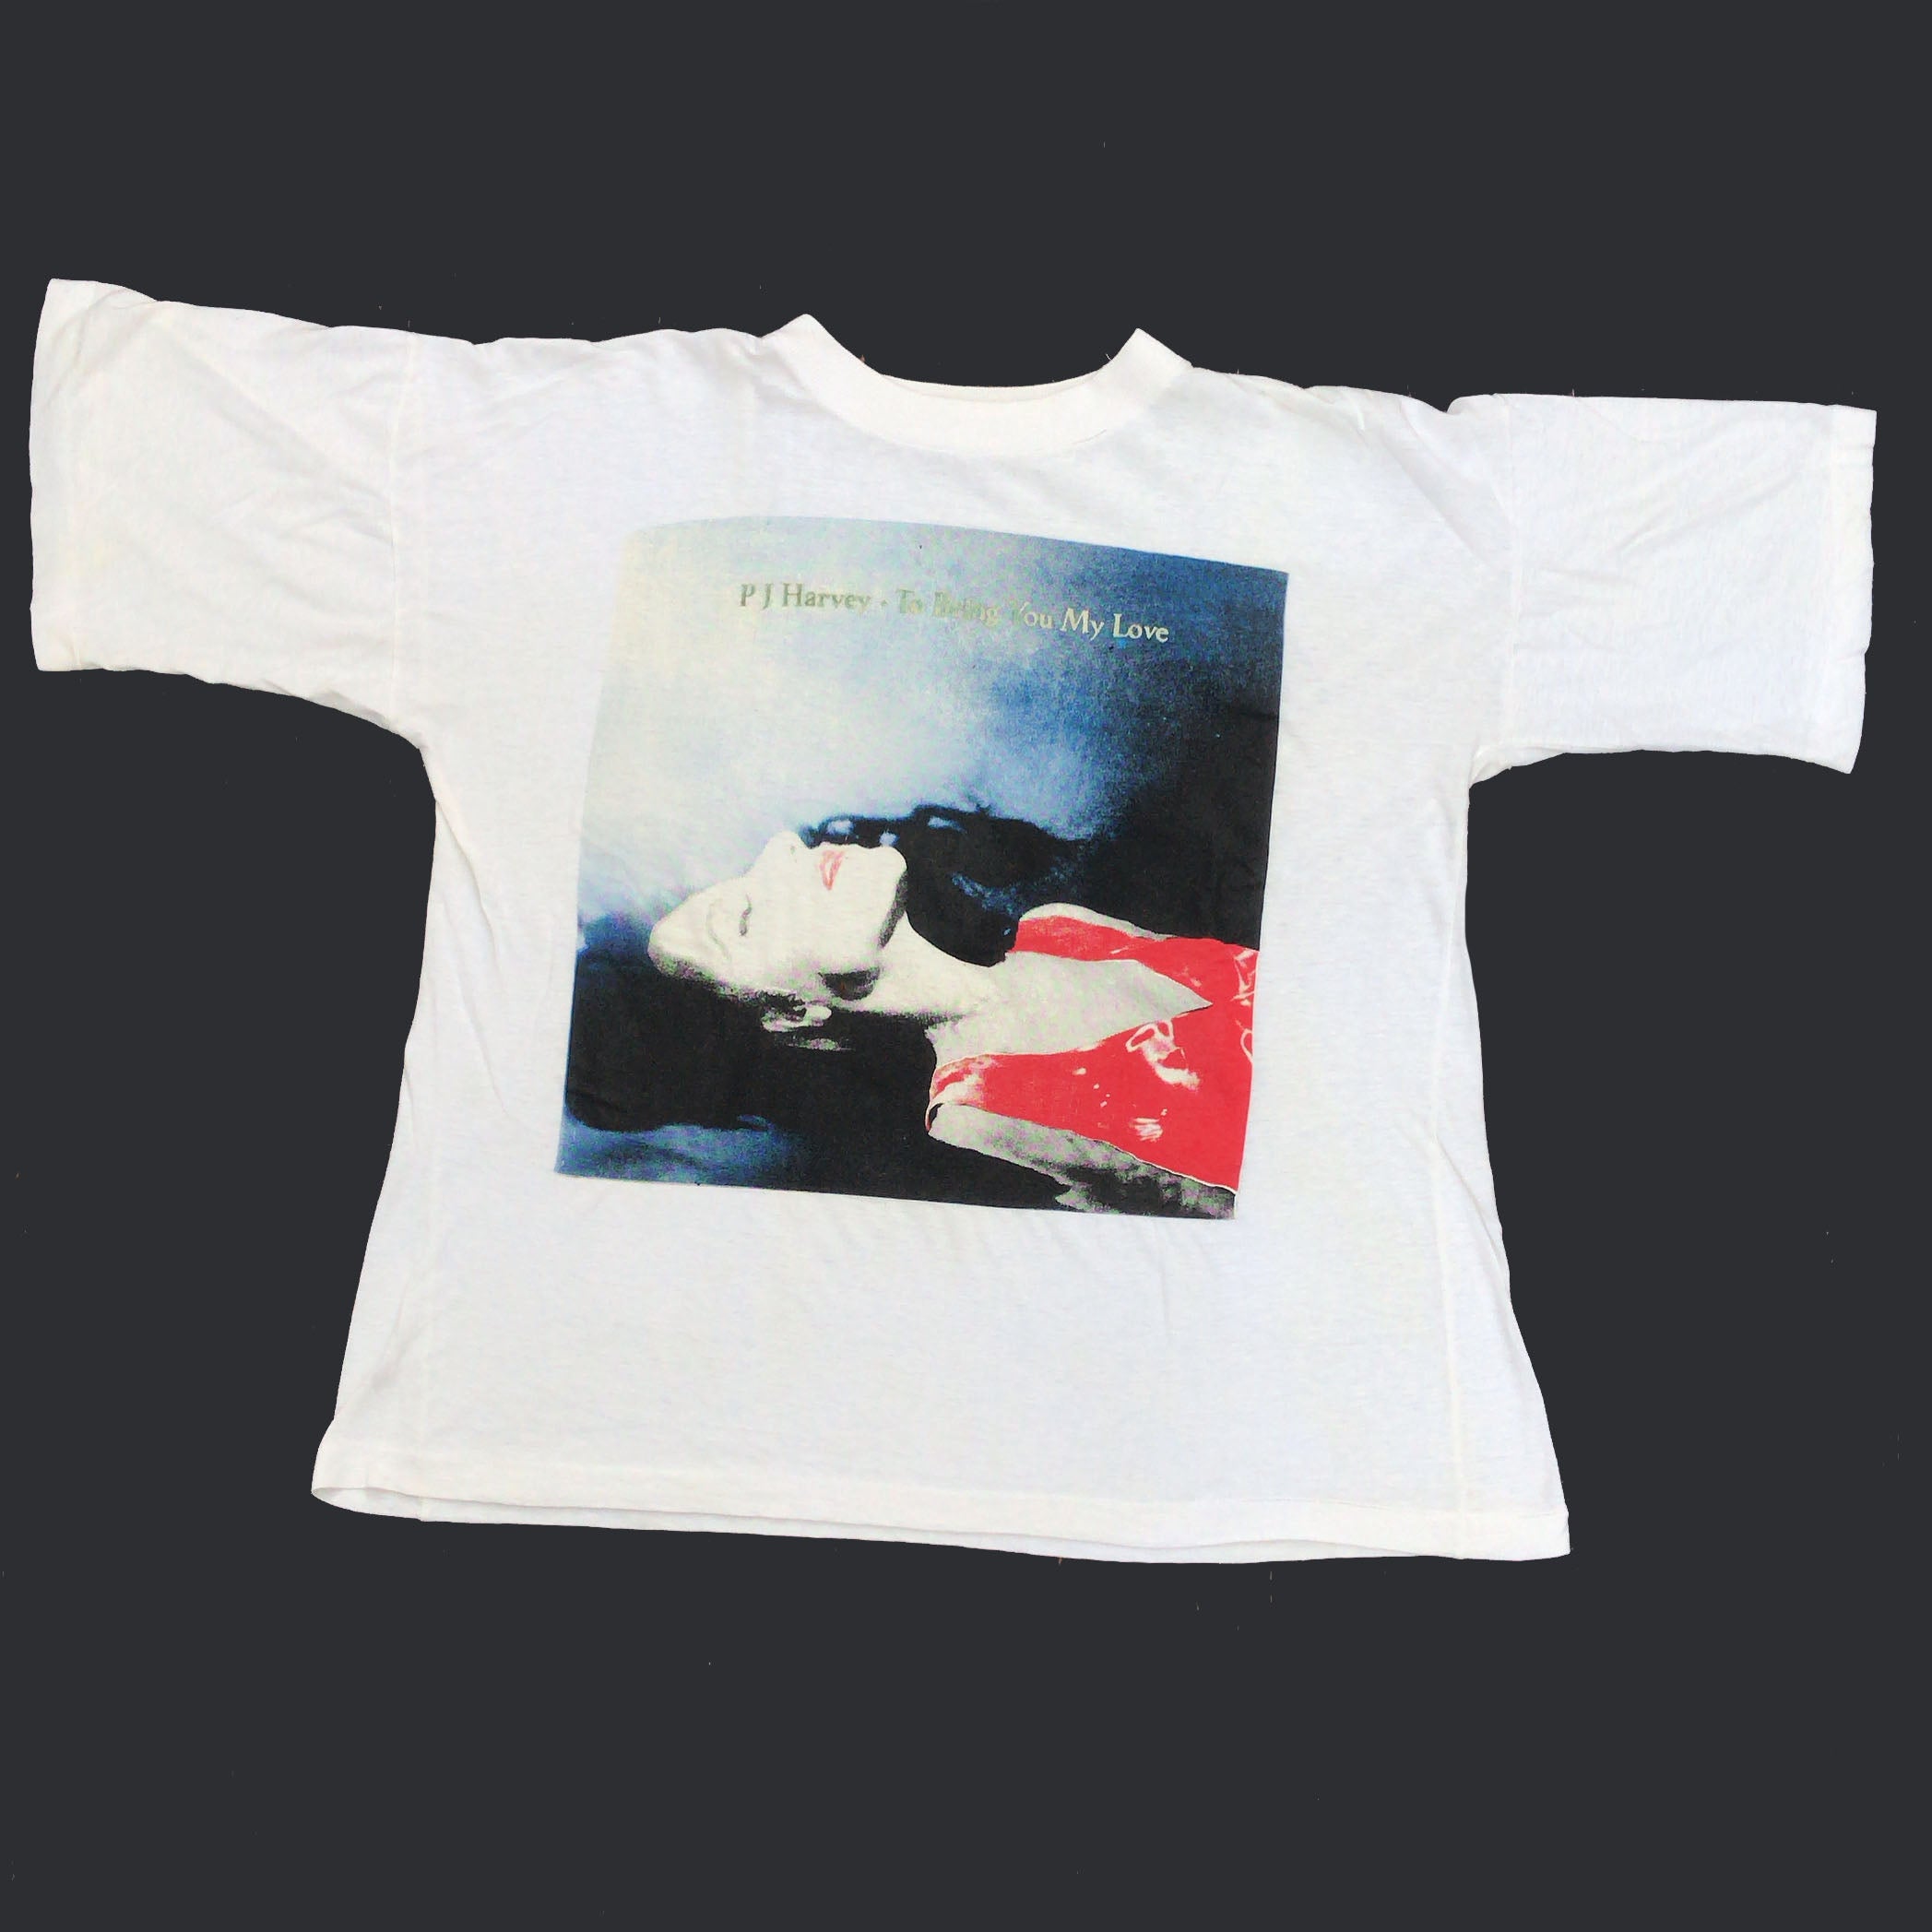 PJ Harvey - I Inside the Old Year Dying Album + T-Shirt Bundle. Partisan  Records Store.